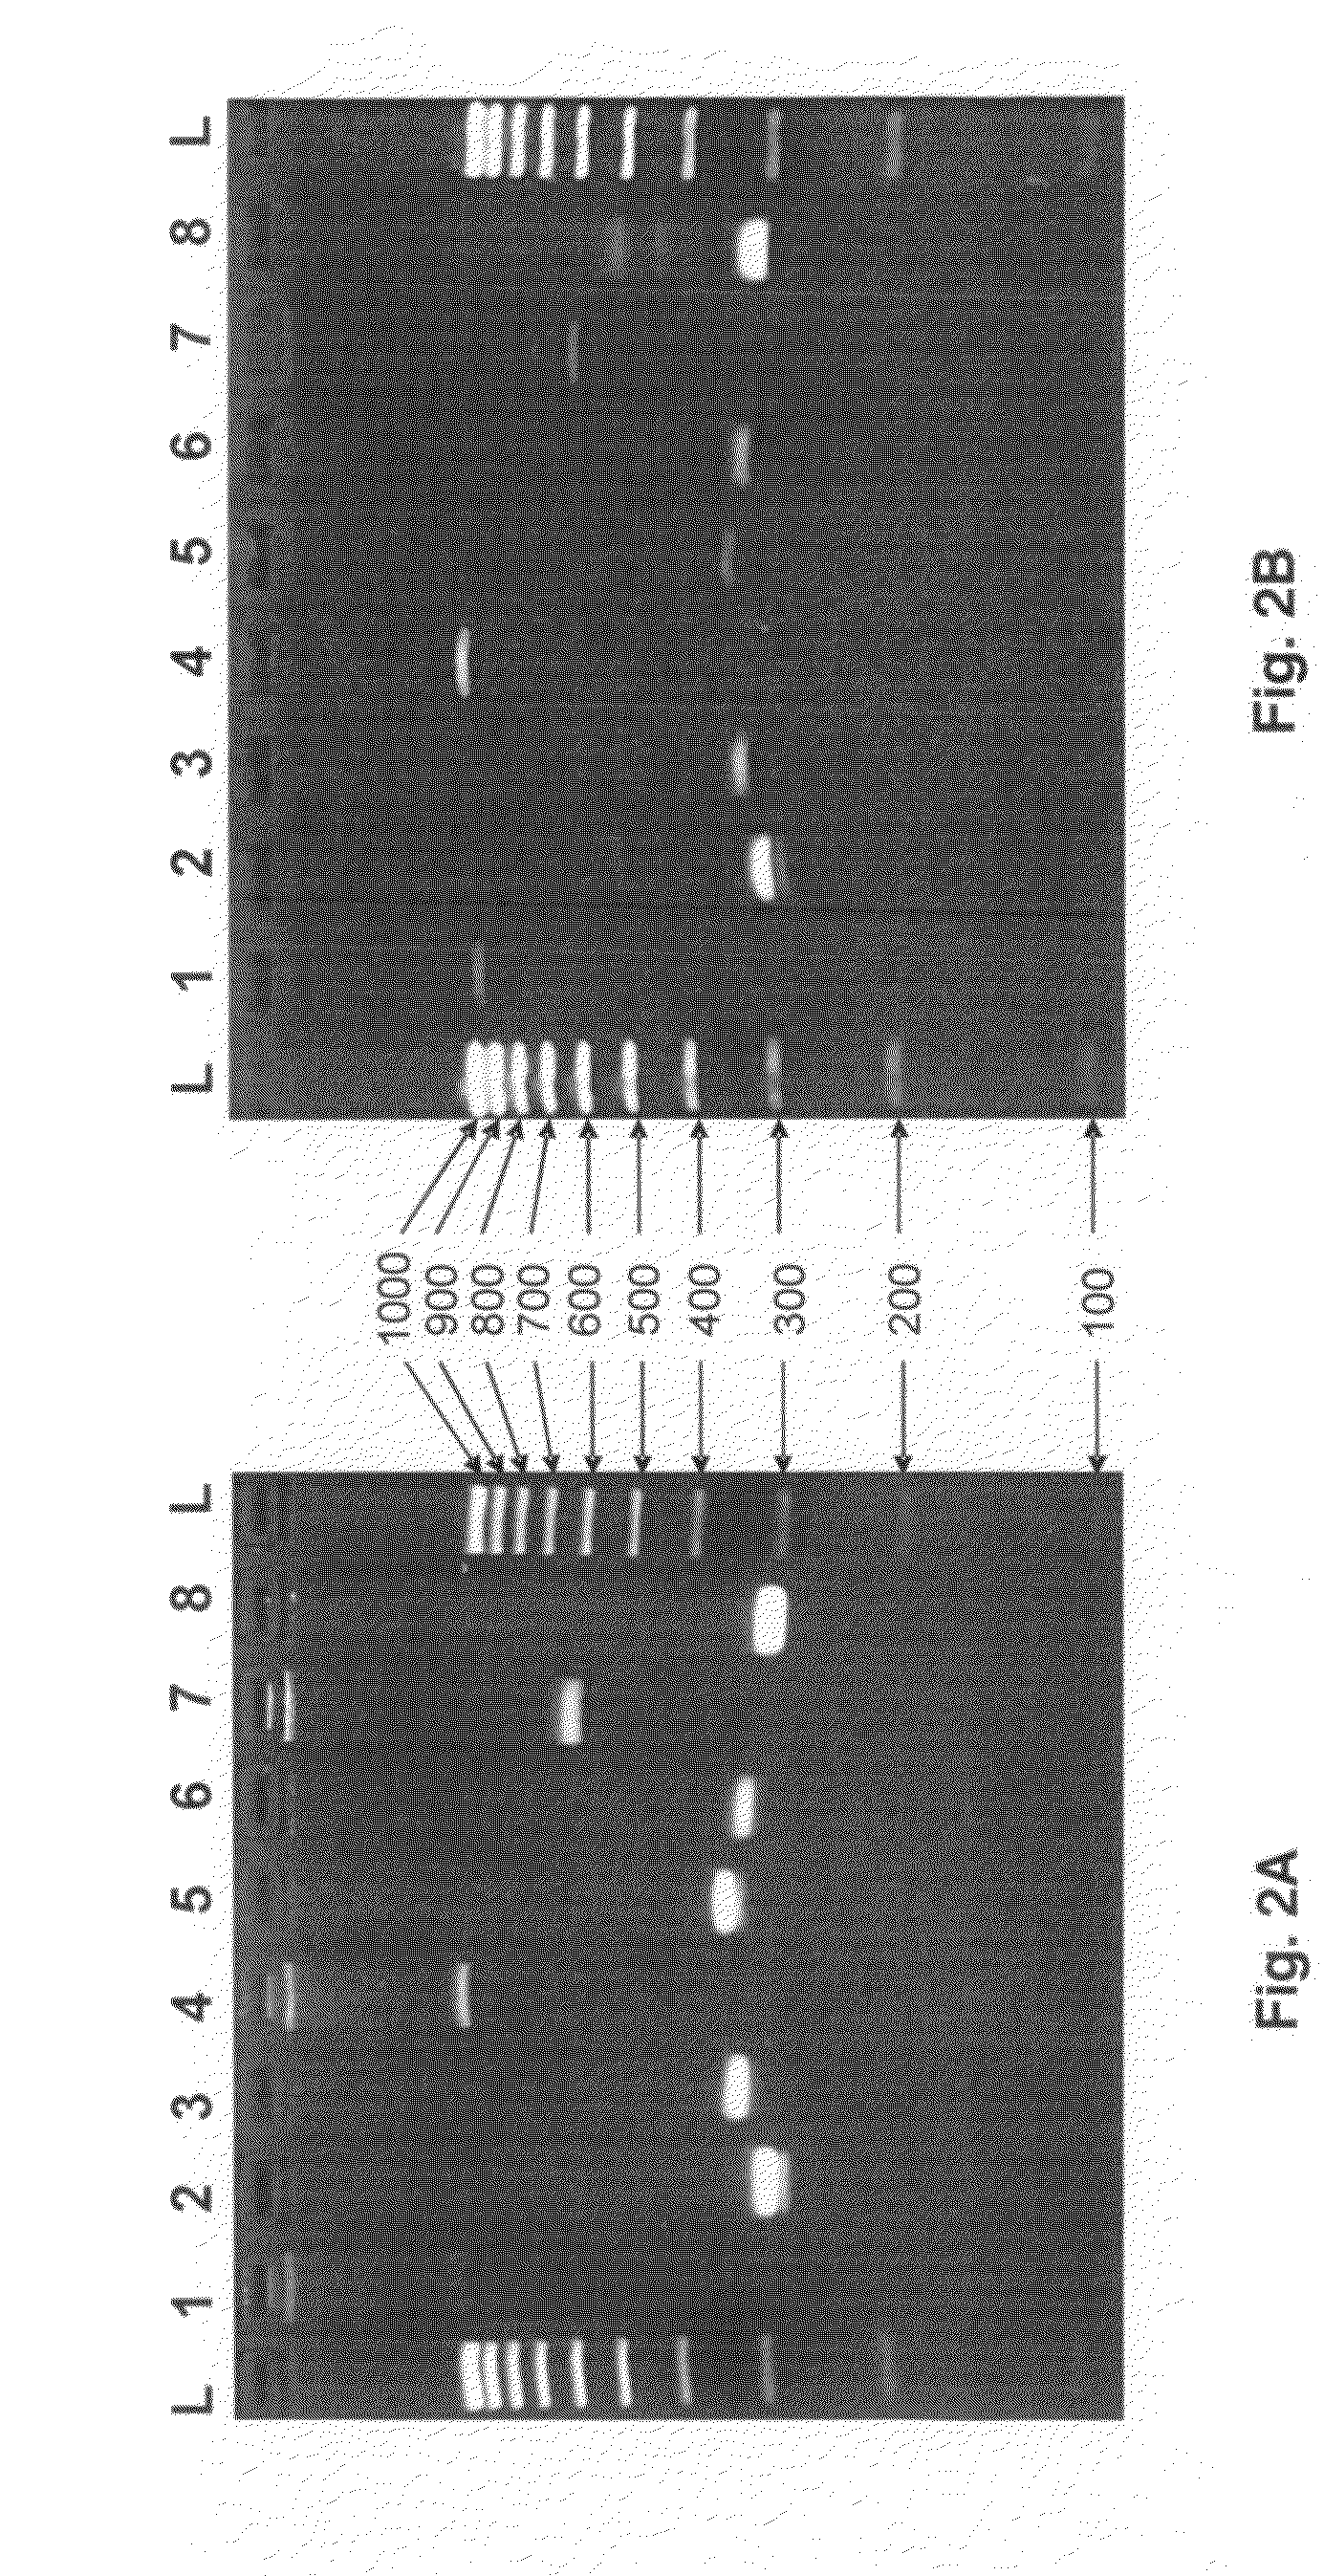 Methods for PCR and HLA typing using unpurified samples